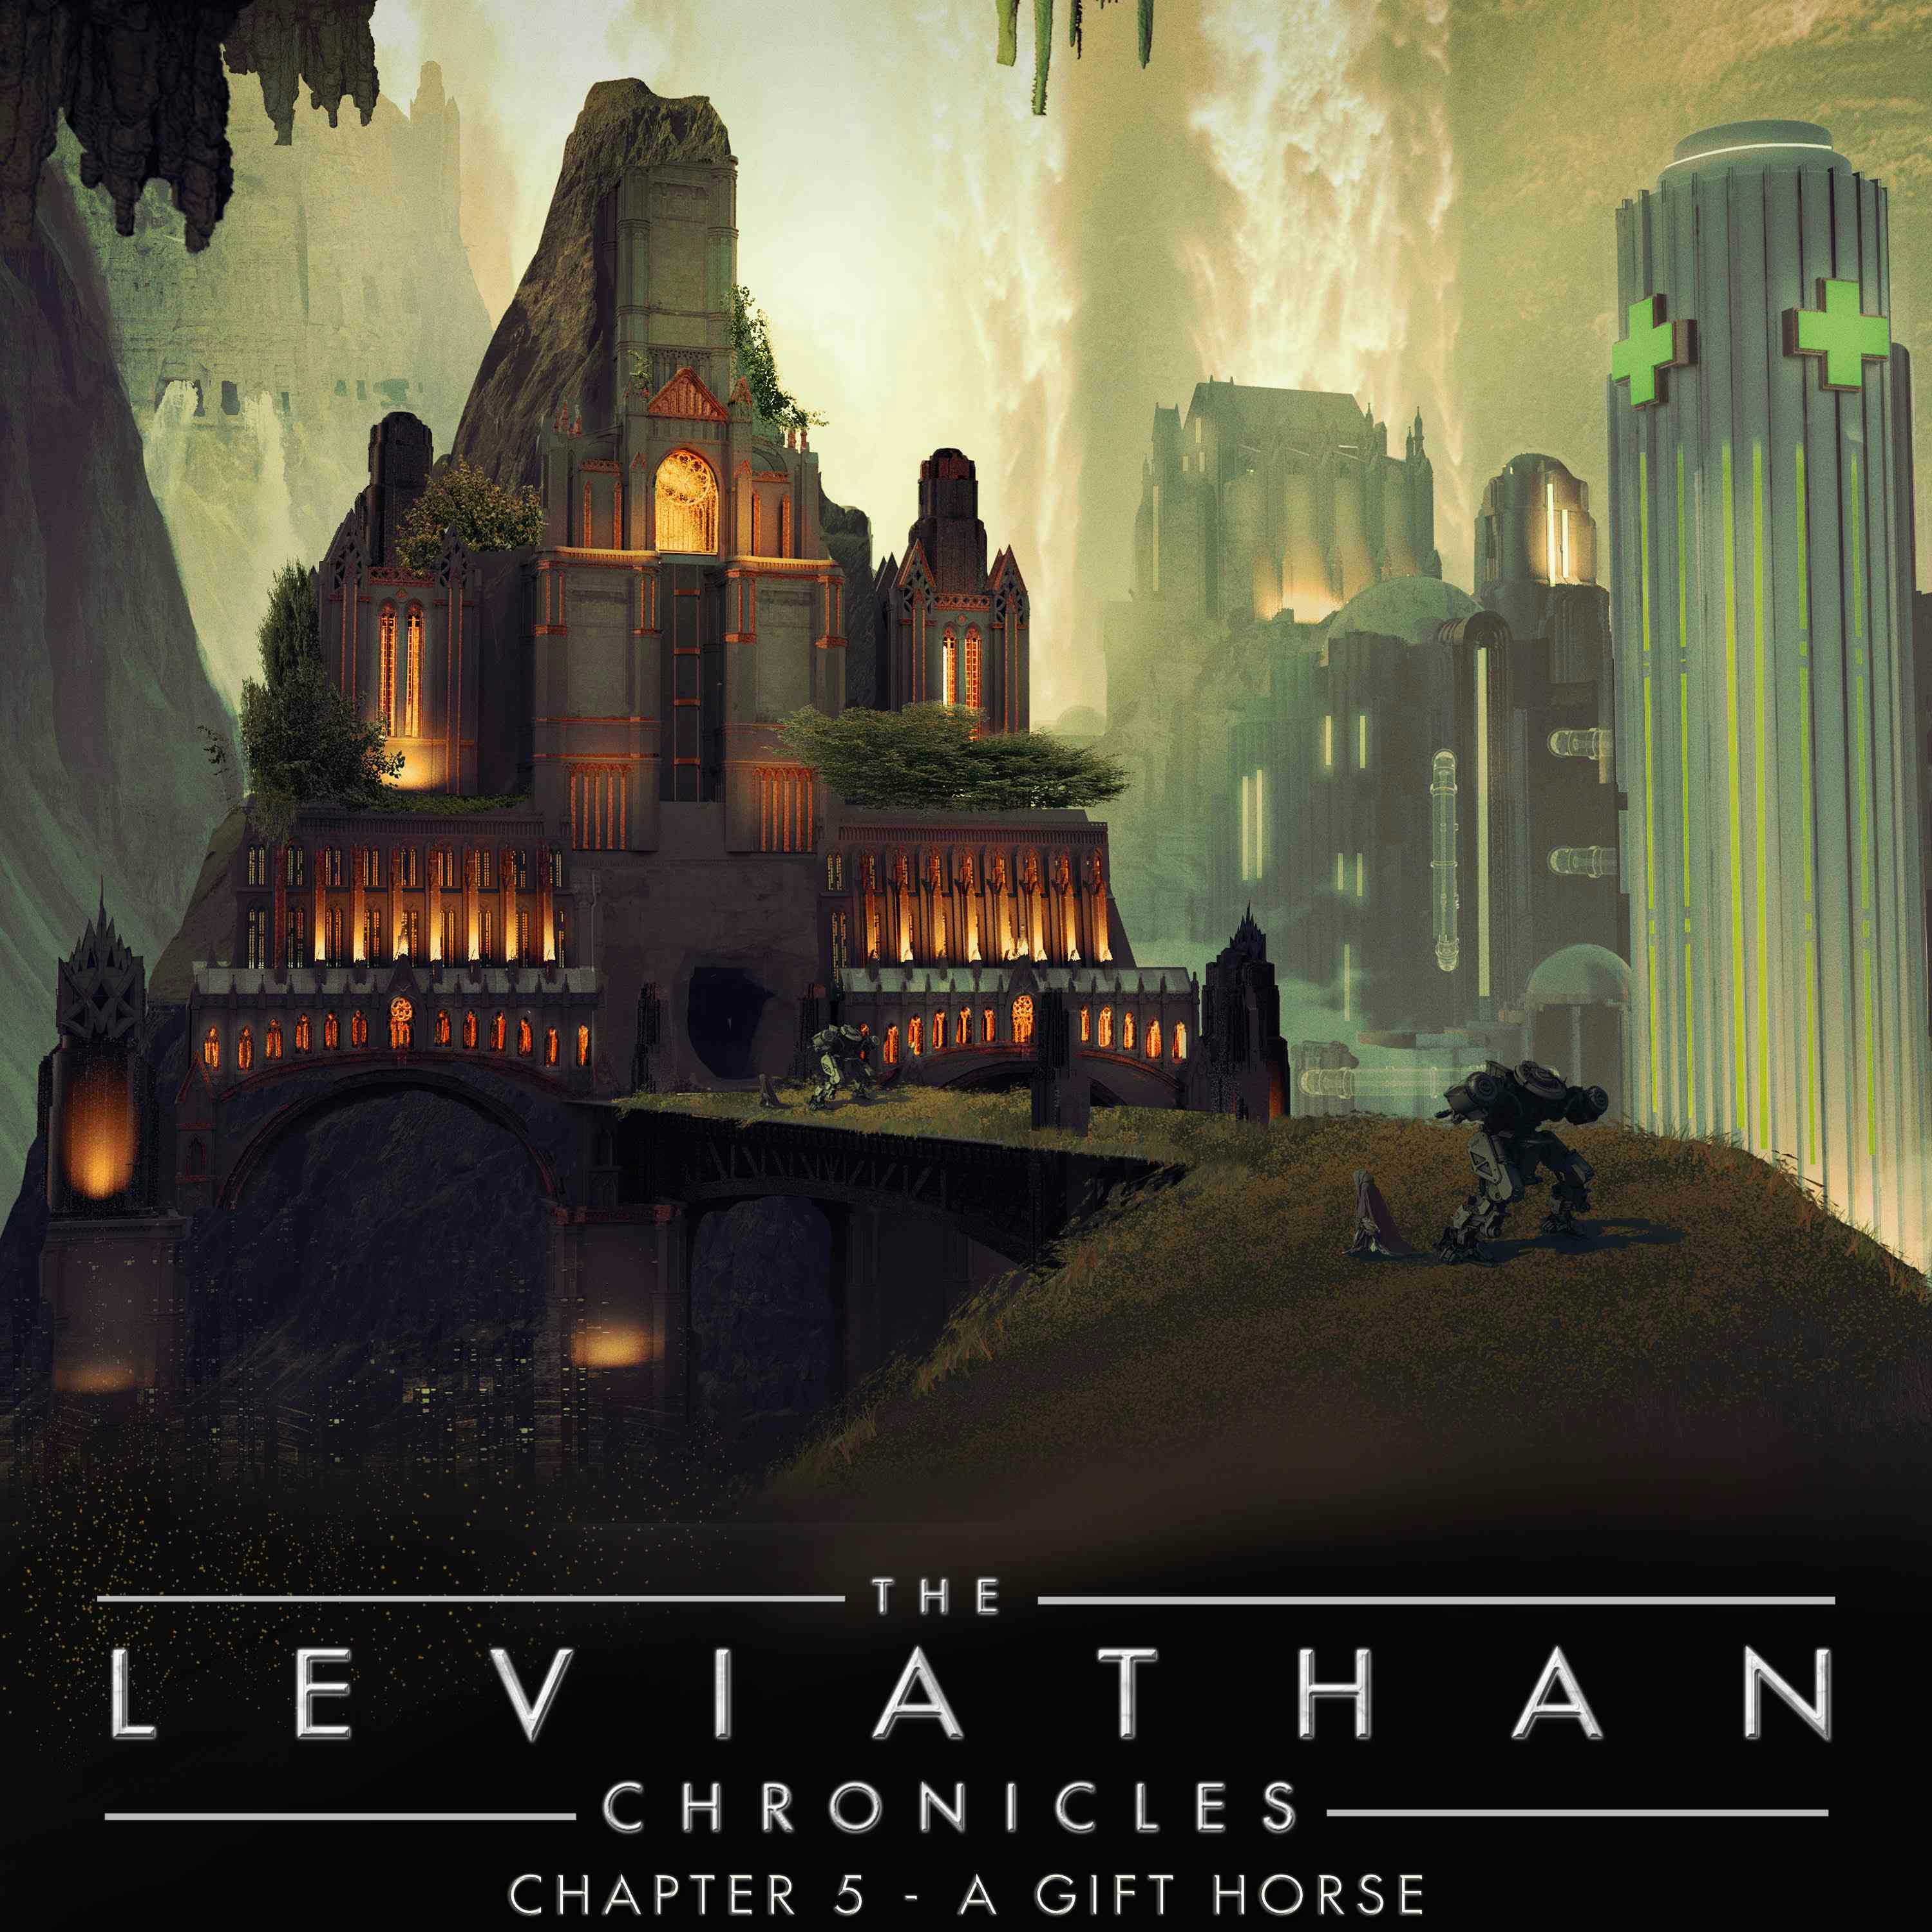 The Leviathan Chronicles | Chapter 5 - A Gift Horse